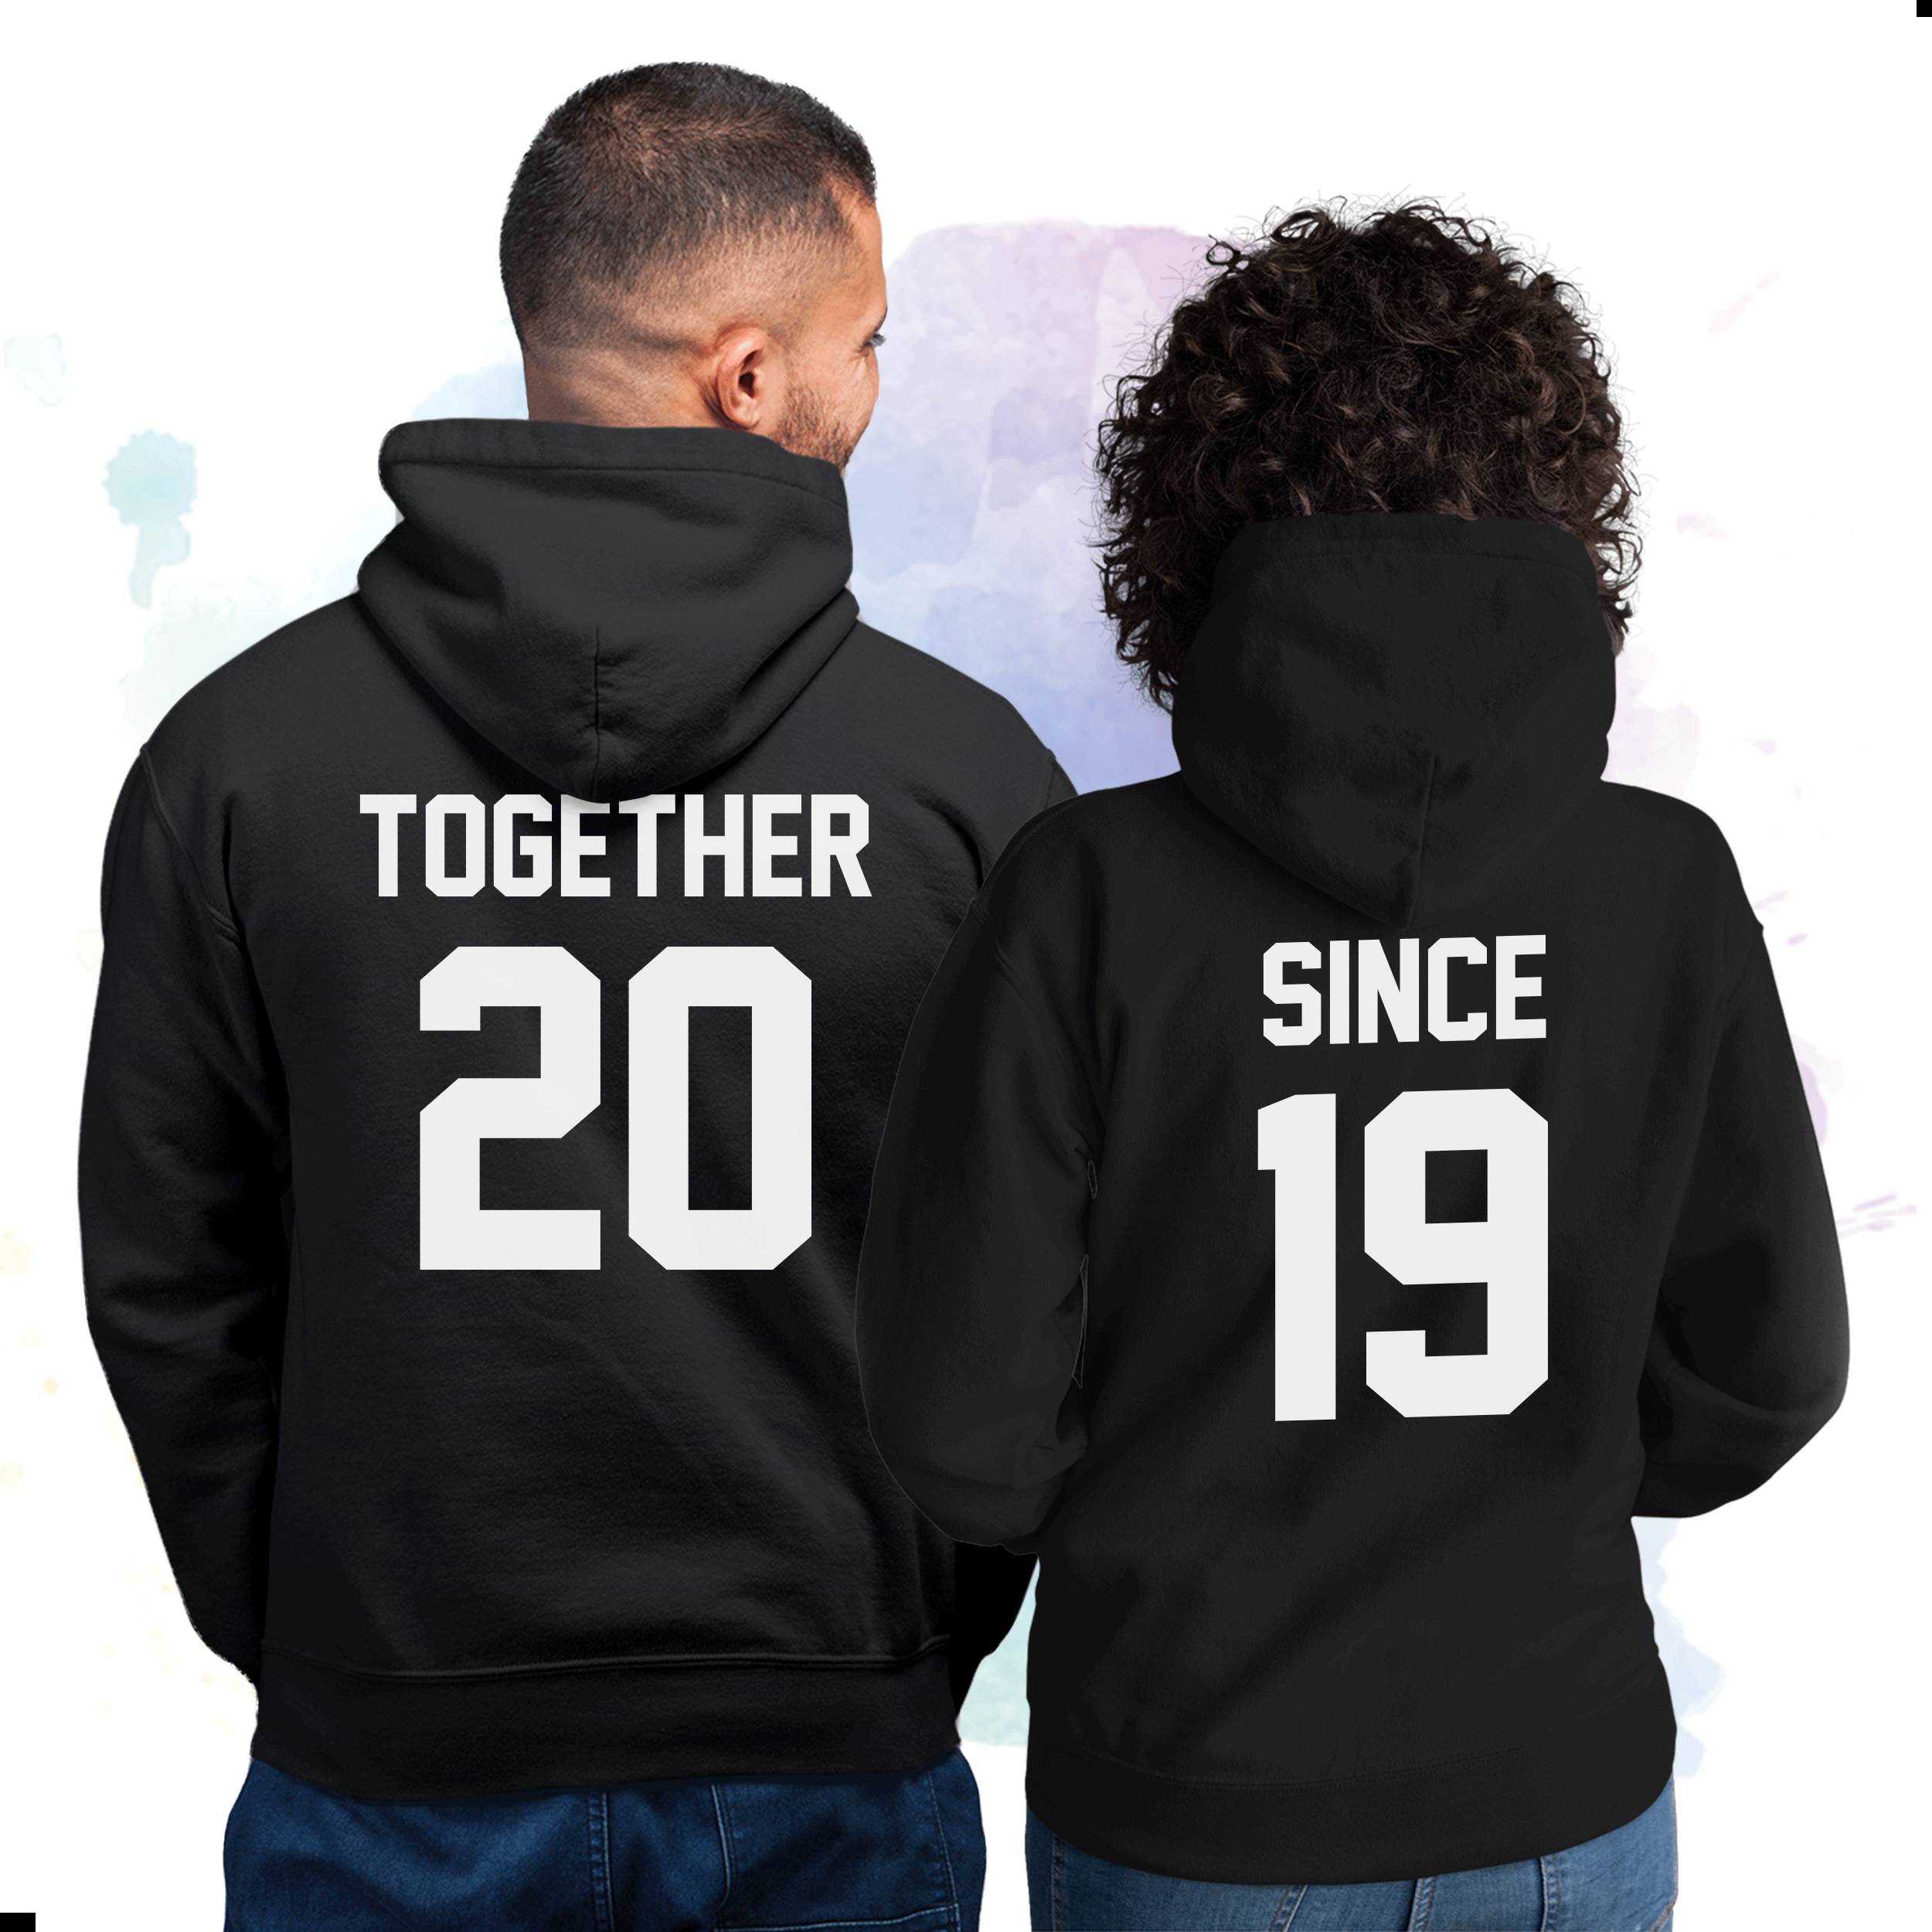 Together Since Couple Hoodies, Matching Hoodies, Personalized Couple Hoodie